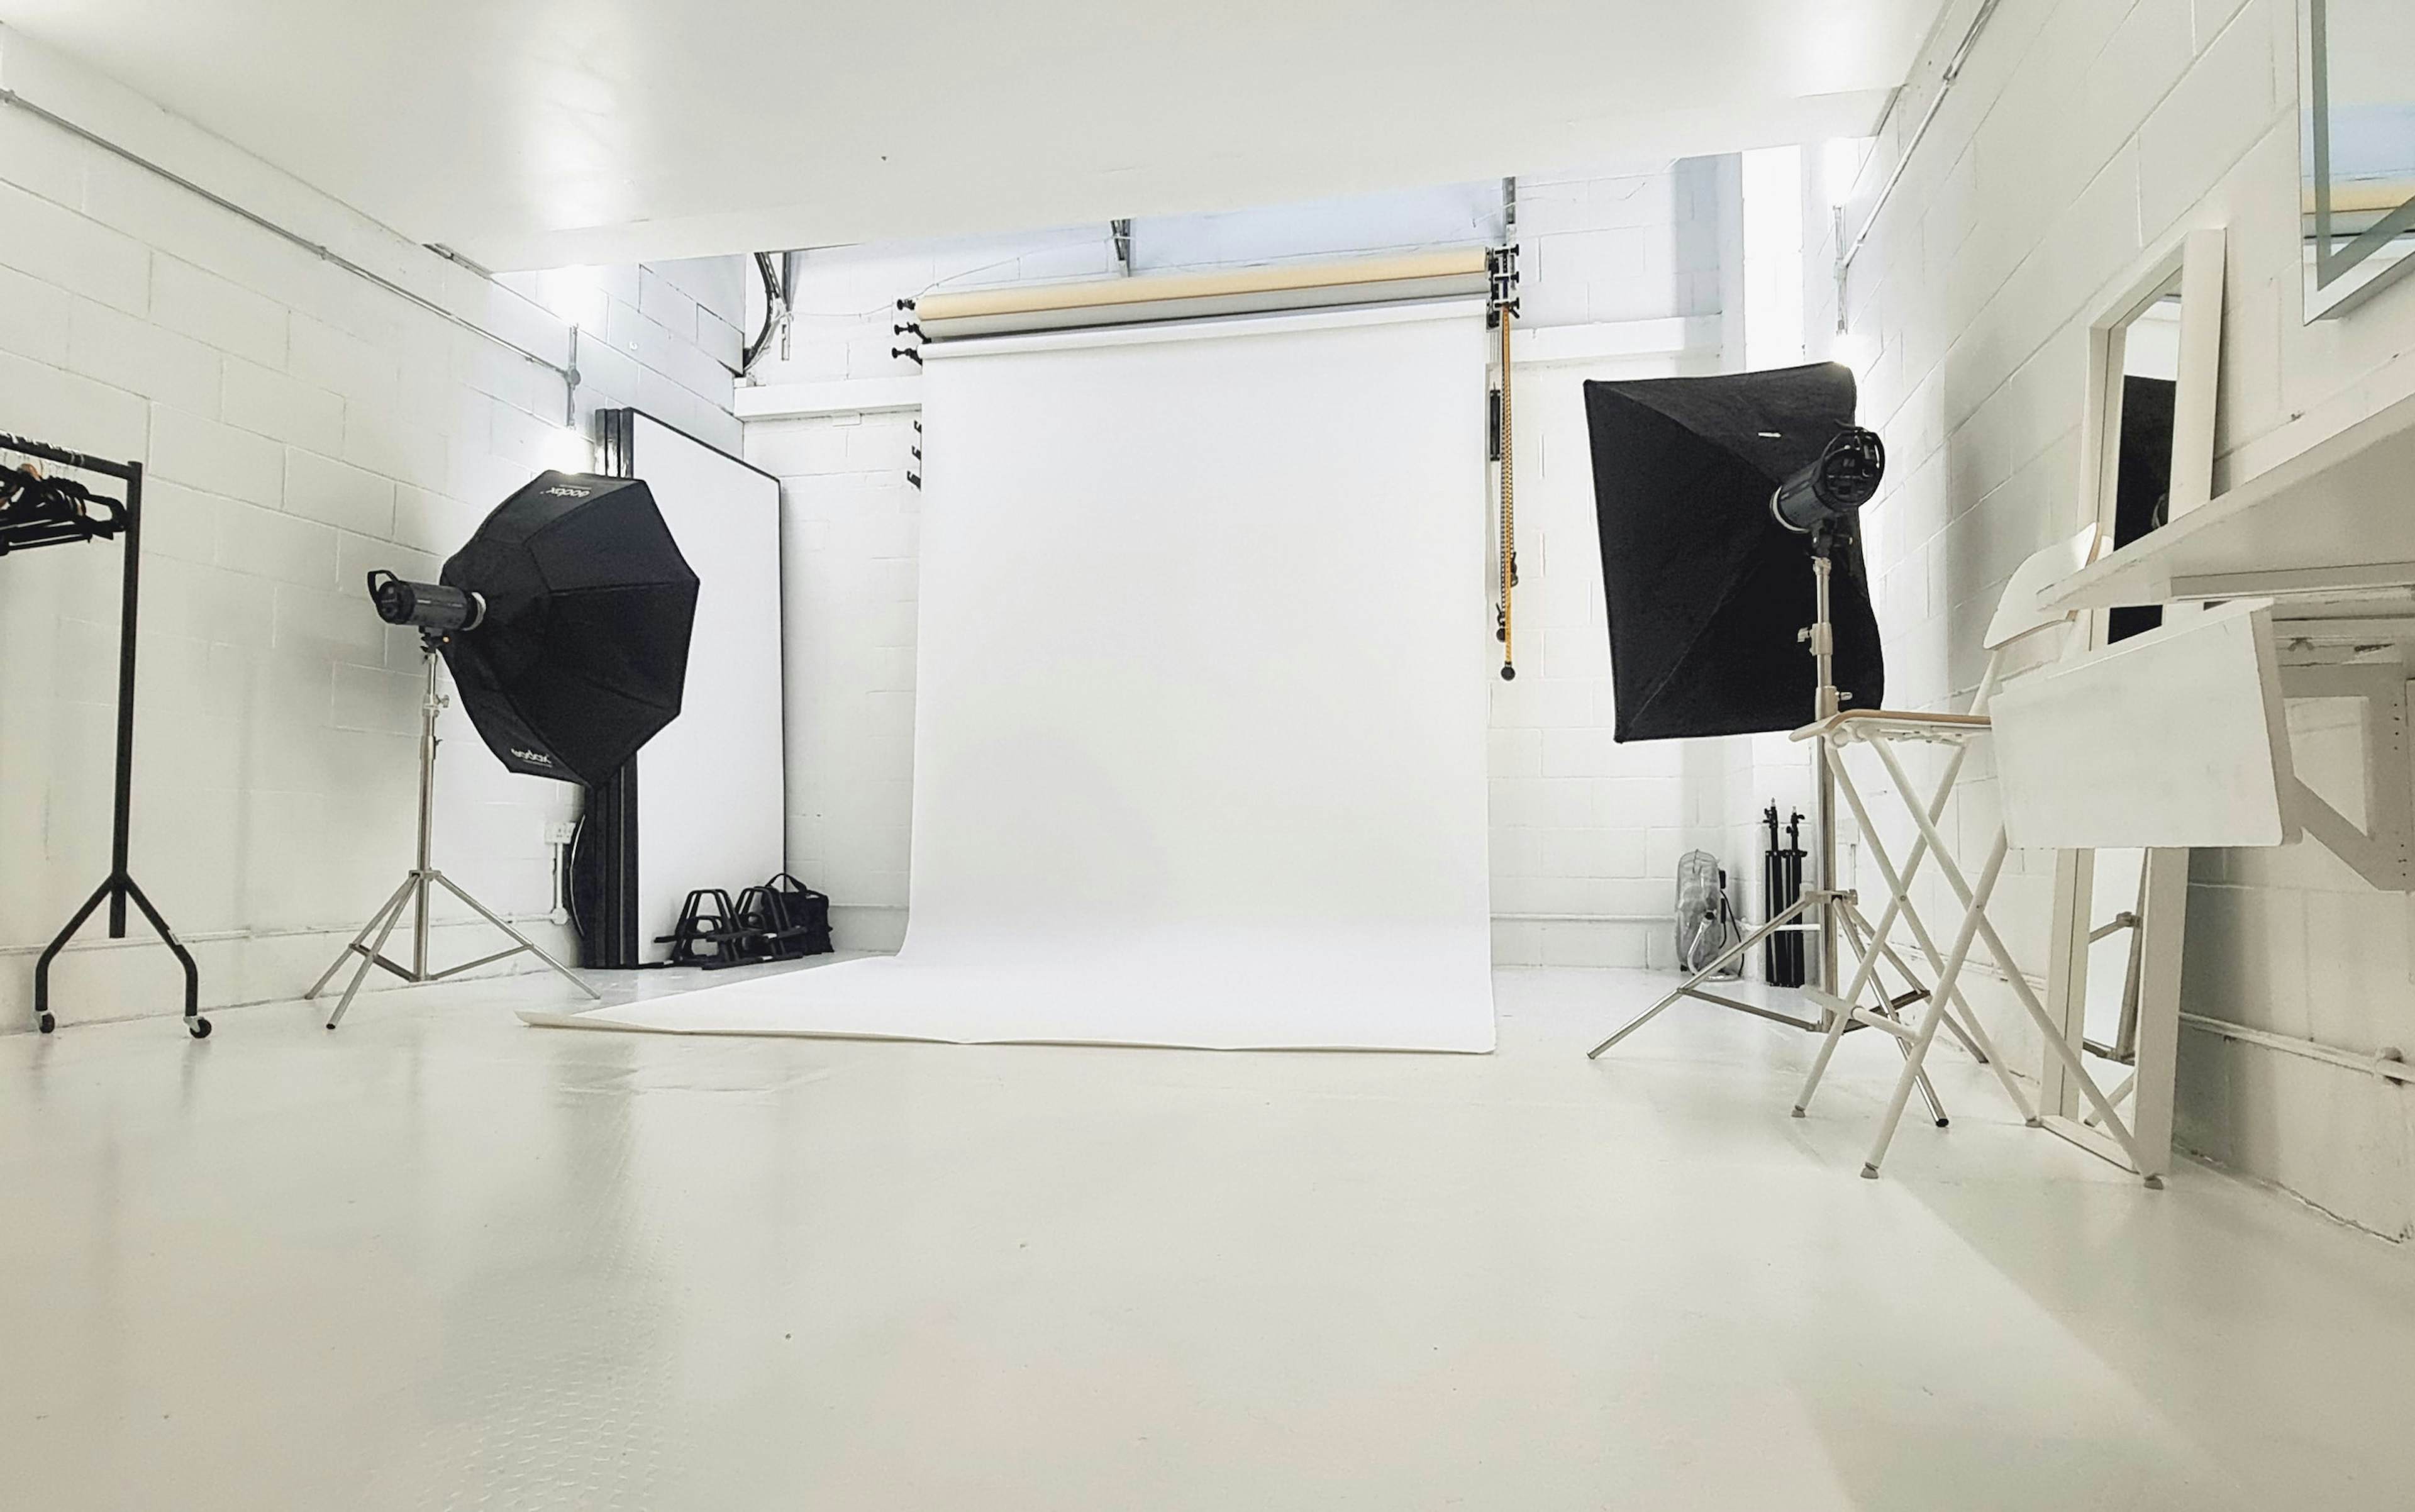 Indra Studios - Daylight / Blackout Video / Photography/Work Shop Studio - space 1 of 3 image 1